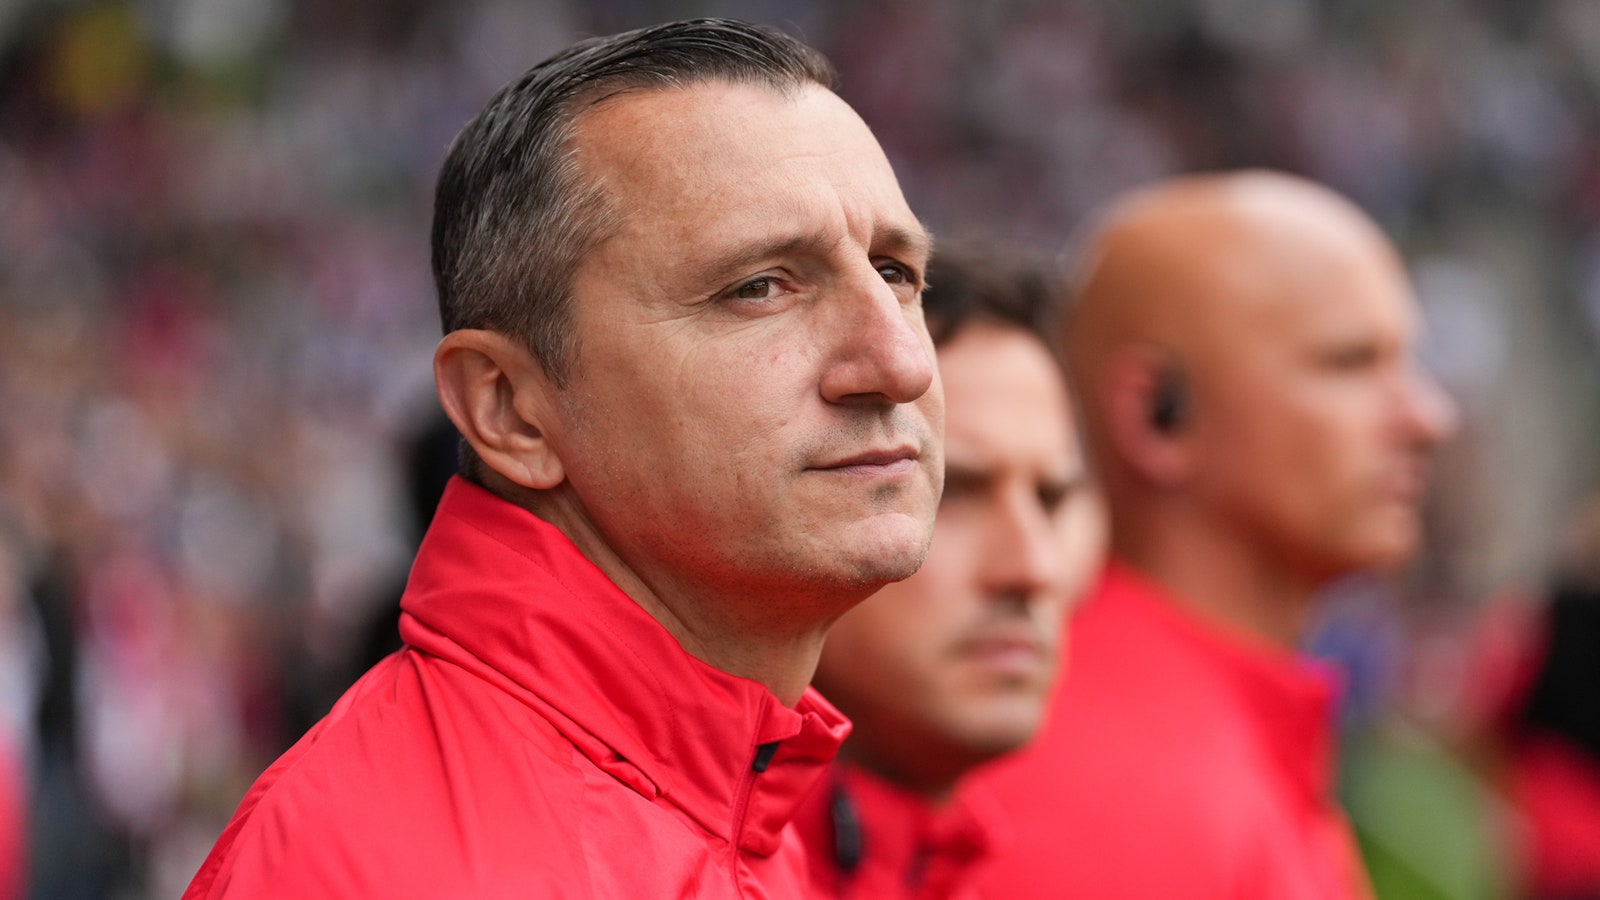 Can Vlatko Andonovski lead USWNT to a three-peat in the 2023 FIFA Women's World Cup?